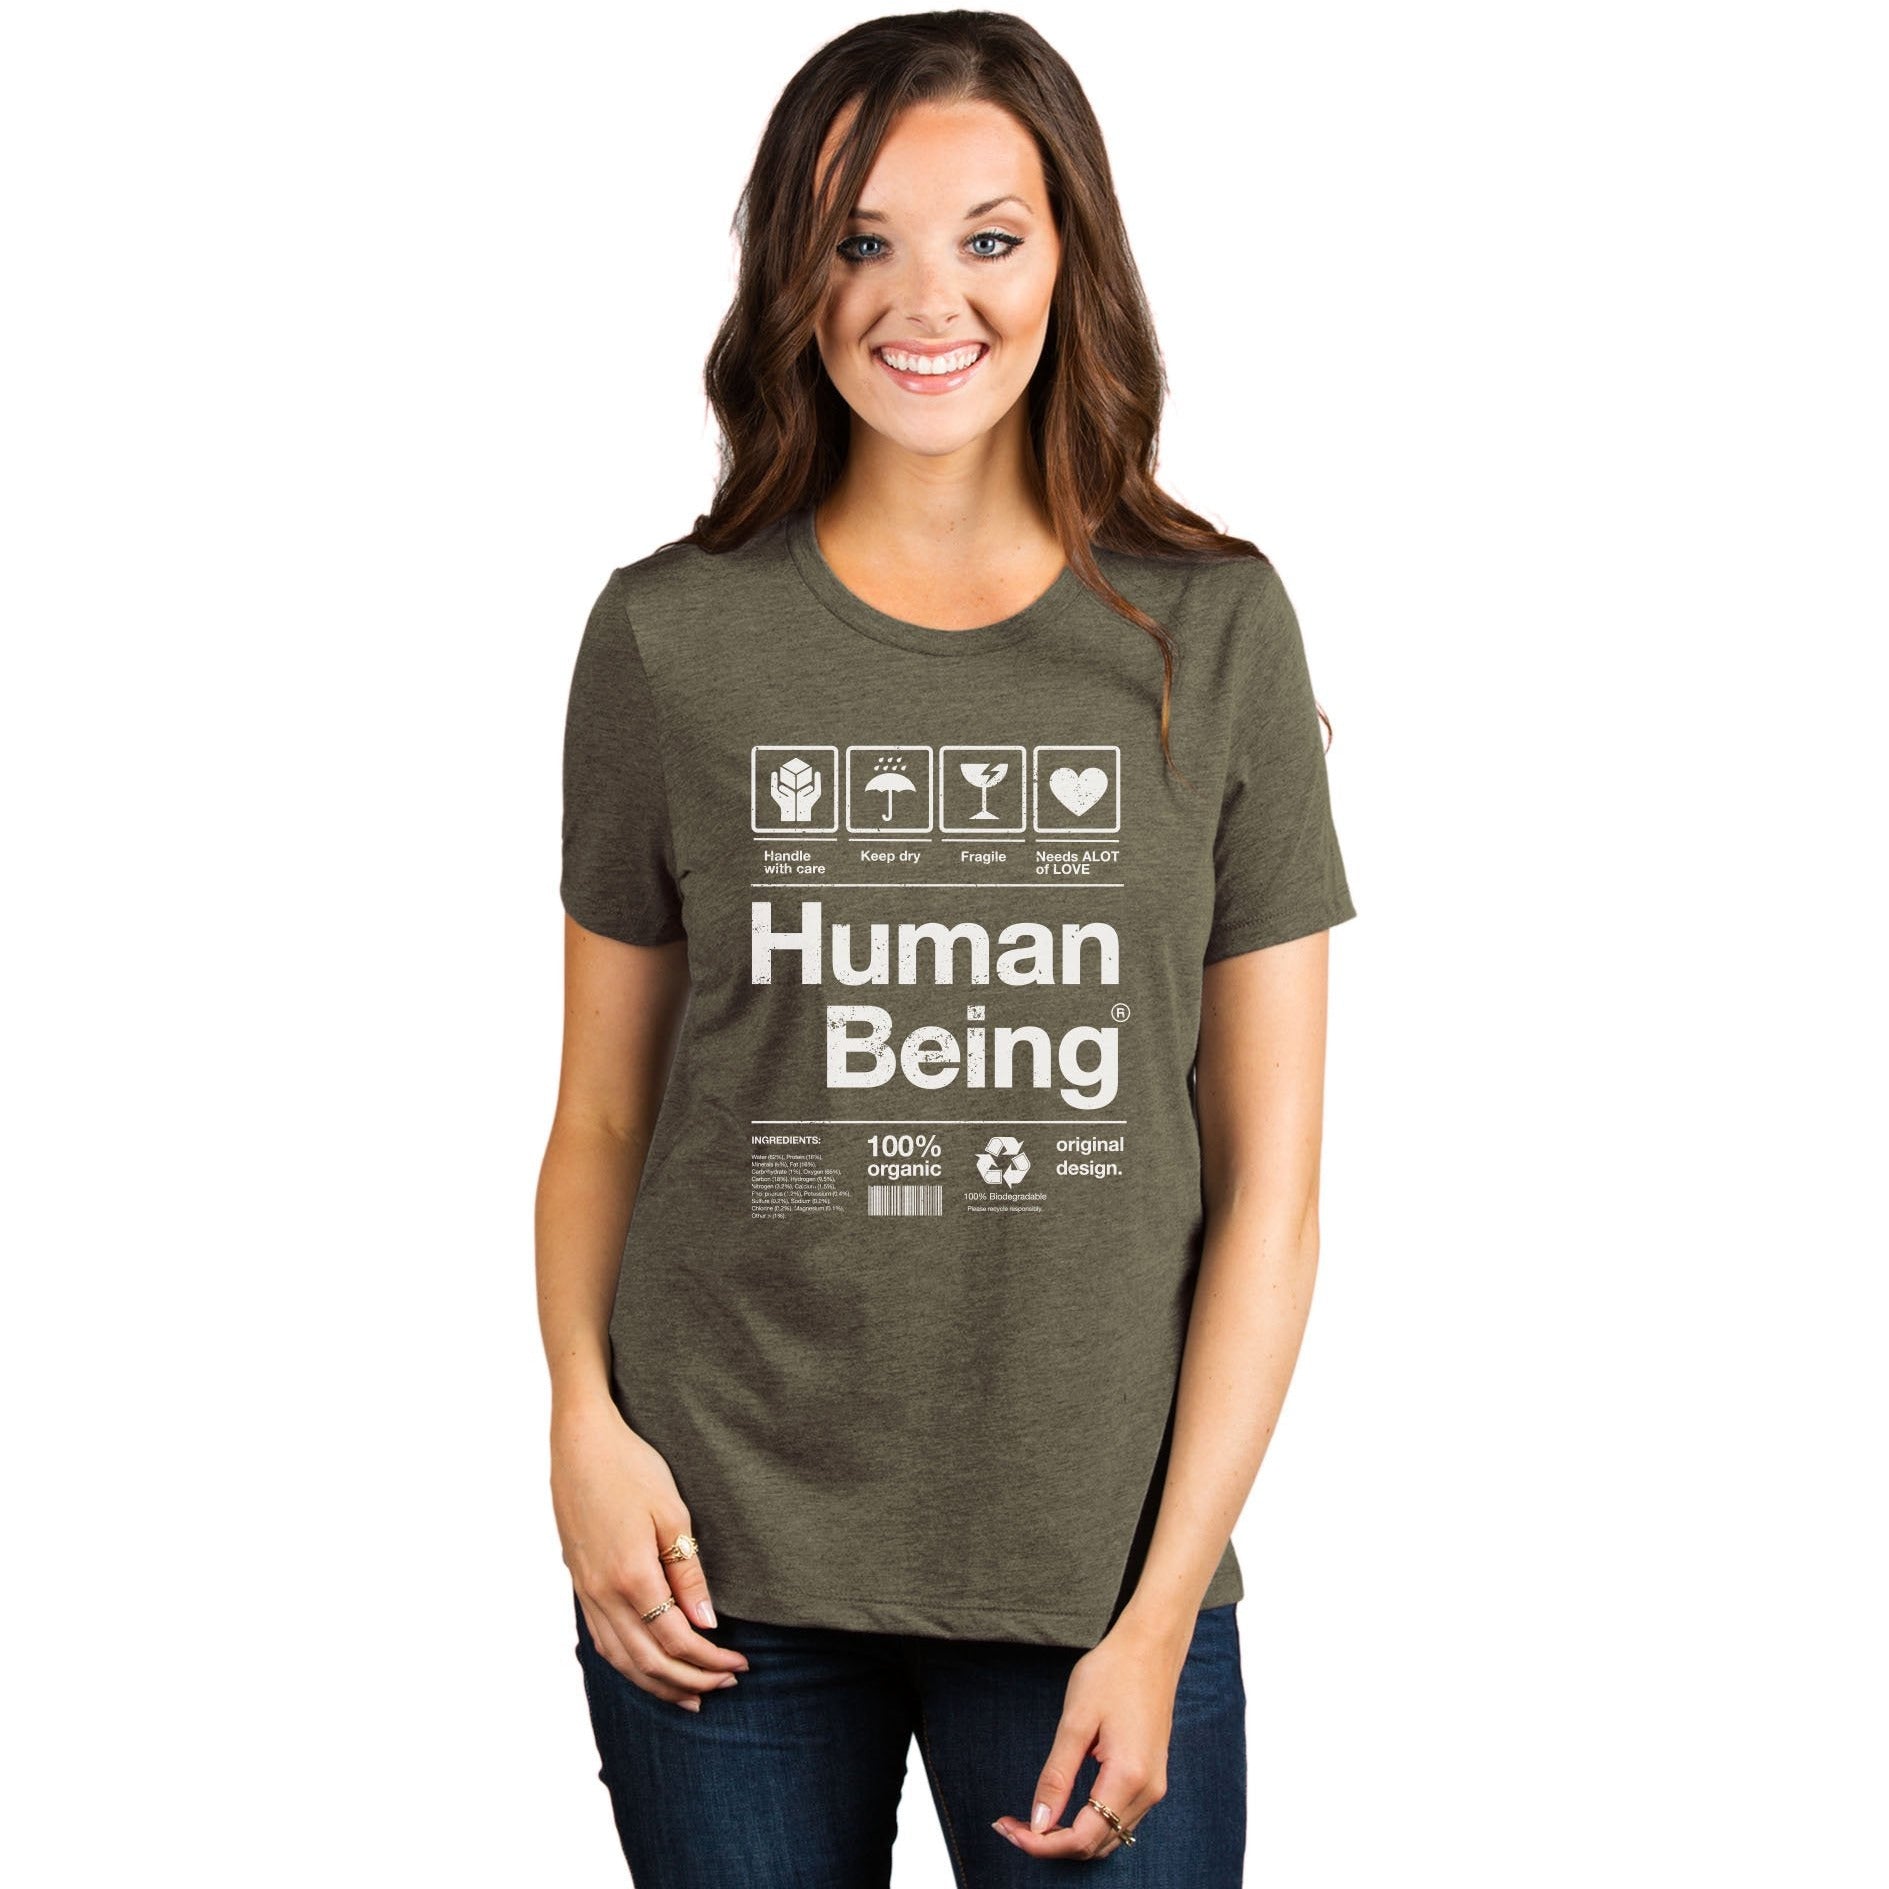 Human Being Women's Relaxed Crewneck T-Shirt Top Tee Heather Sage